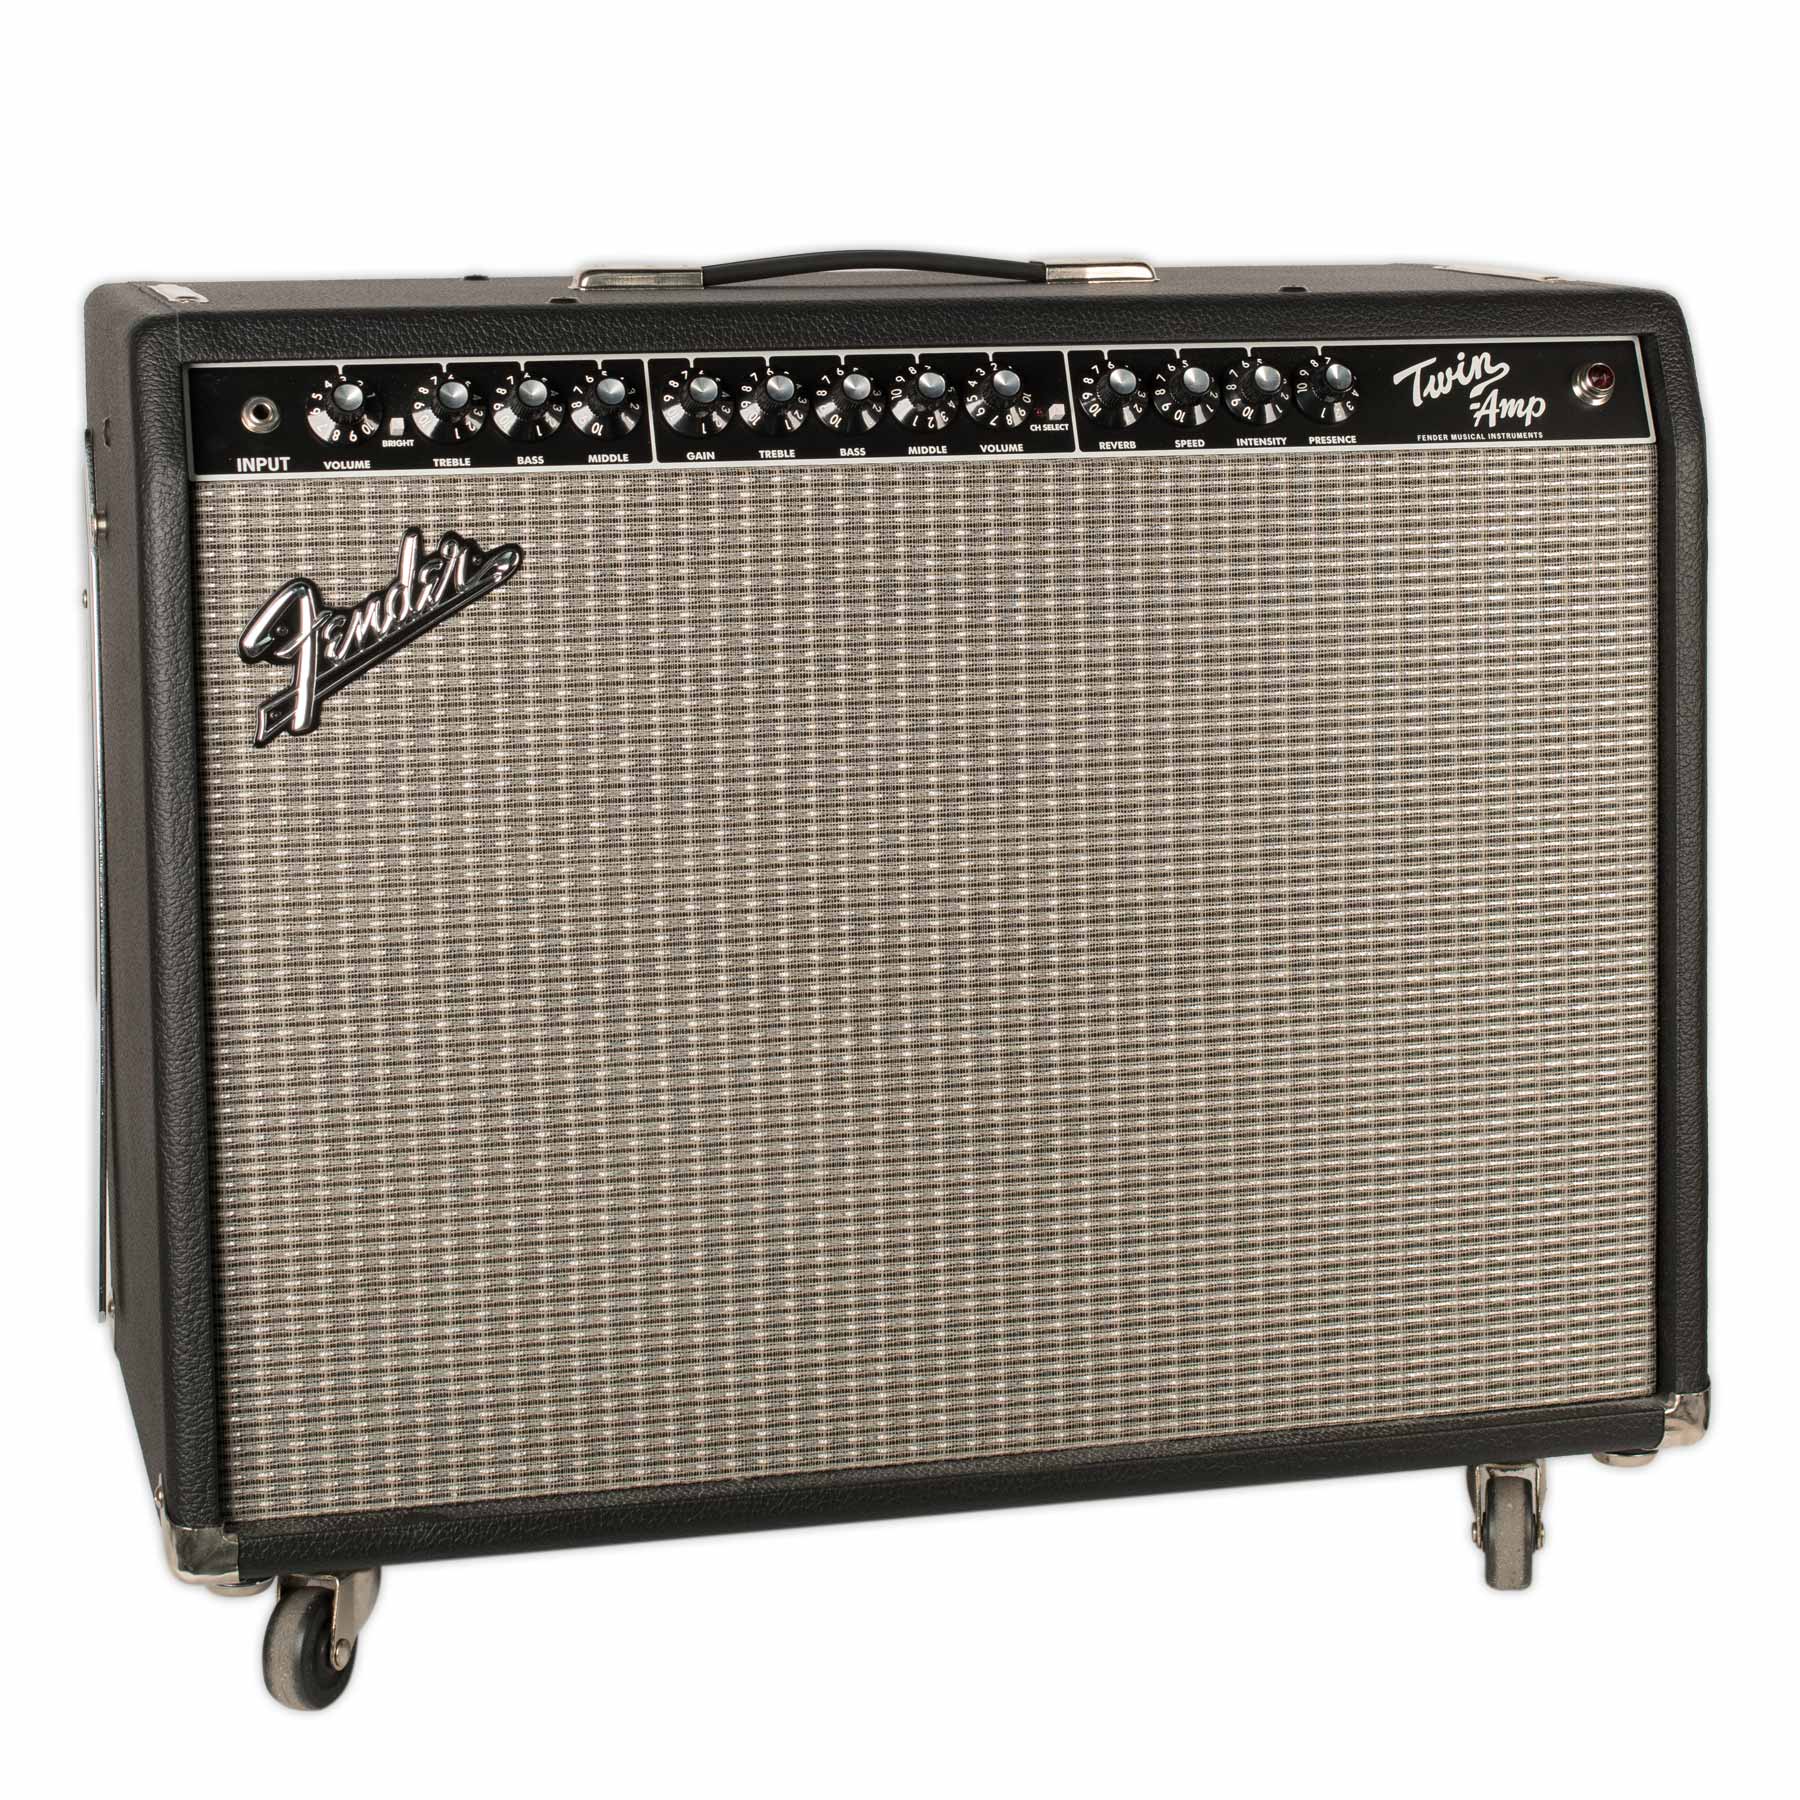 USED FENDER TWIN AMP WITH TREM WITH FOOTSWITCH